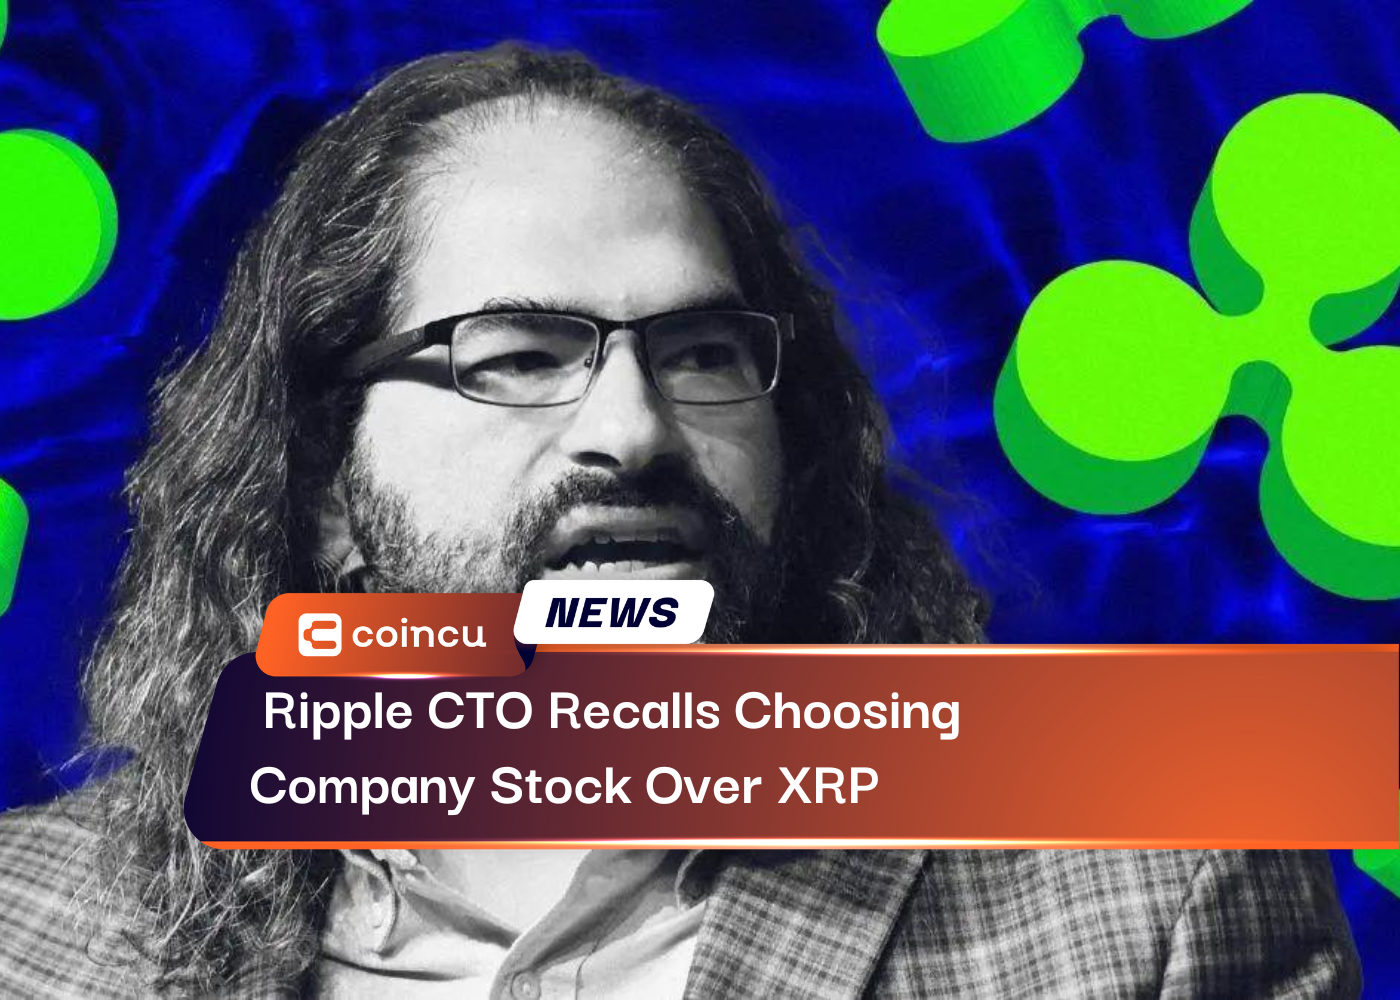 Company Stock Over XRP